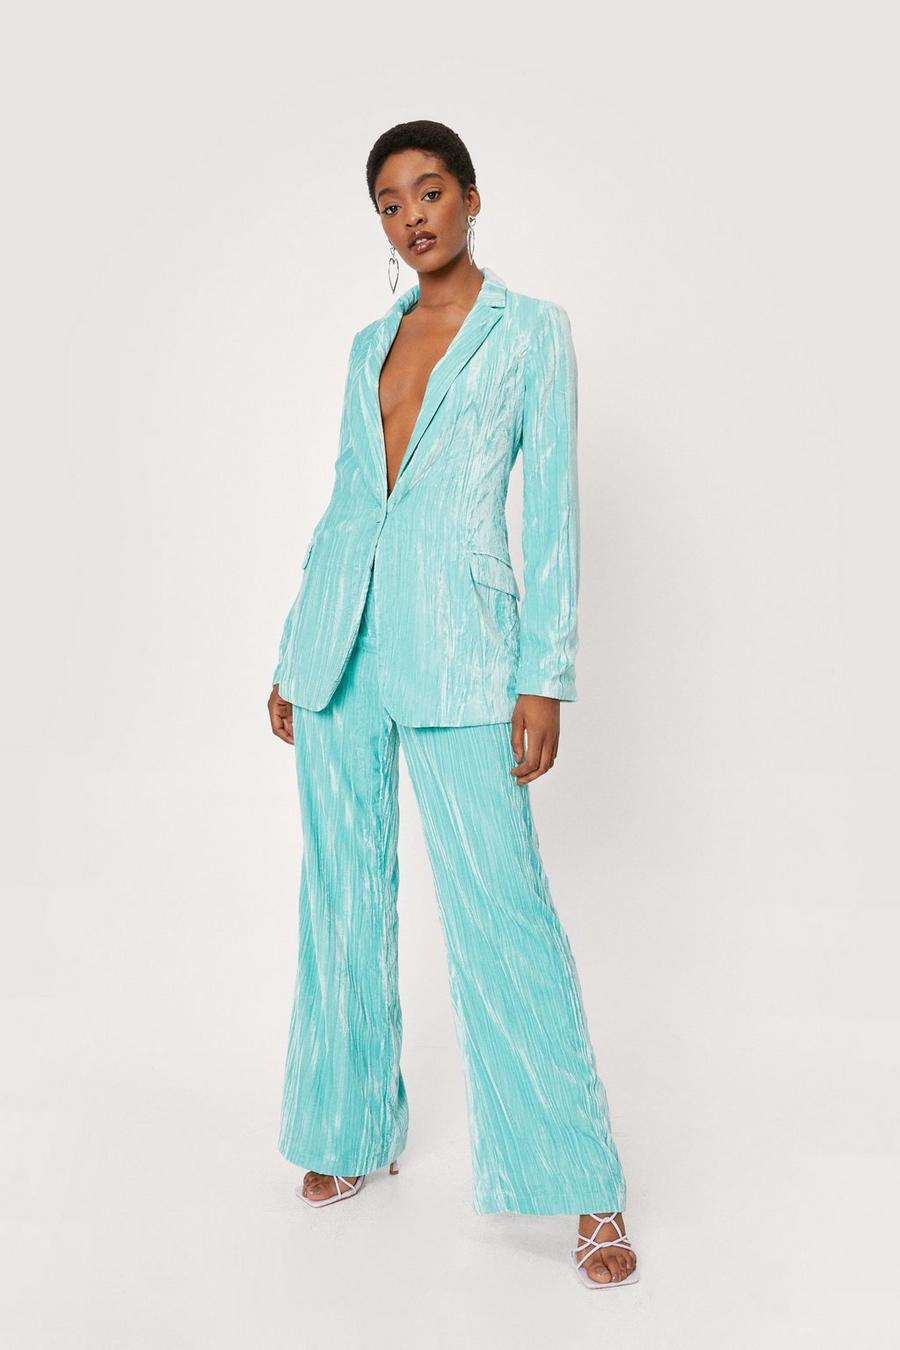 Mint Crushed Velvet High Waisted Wide Leg Abstract Trousers